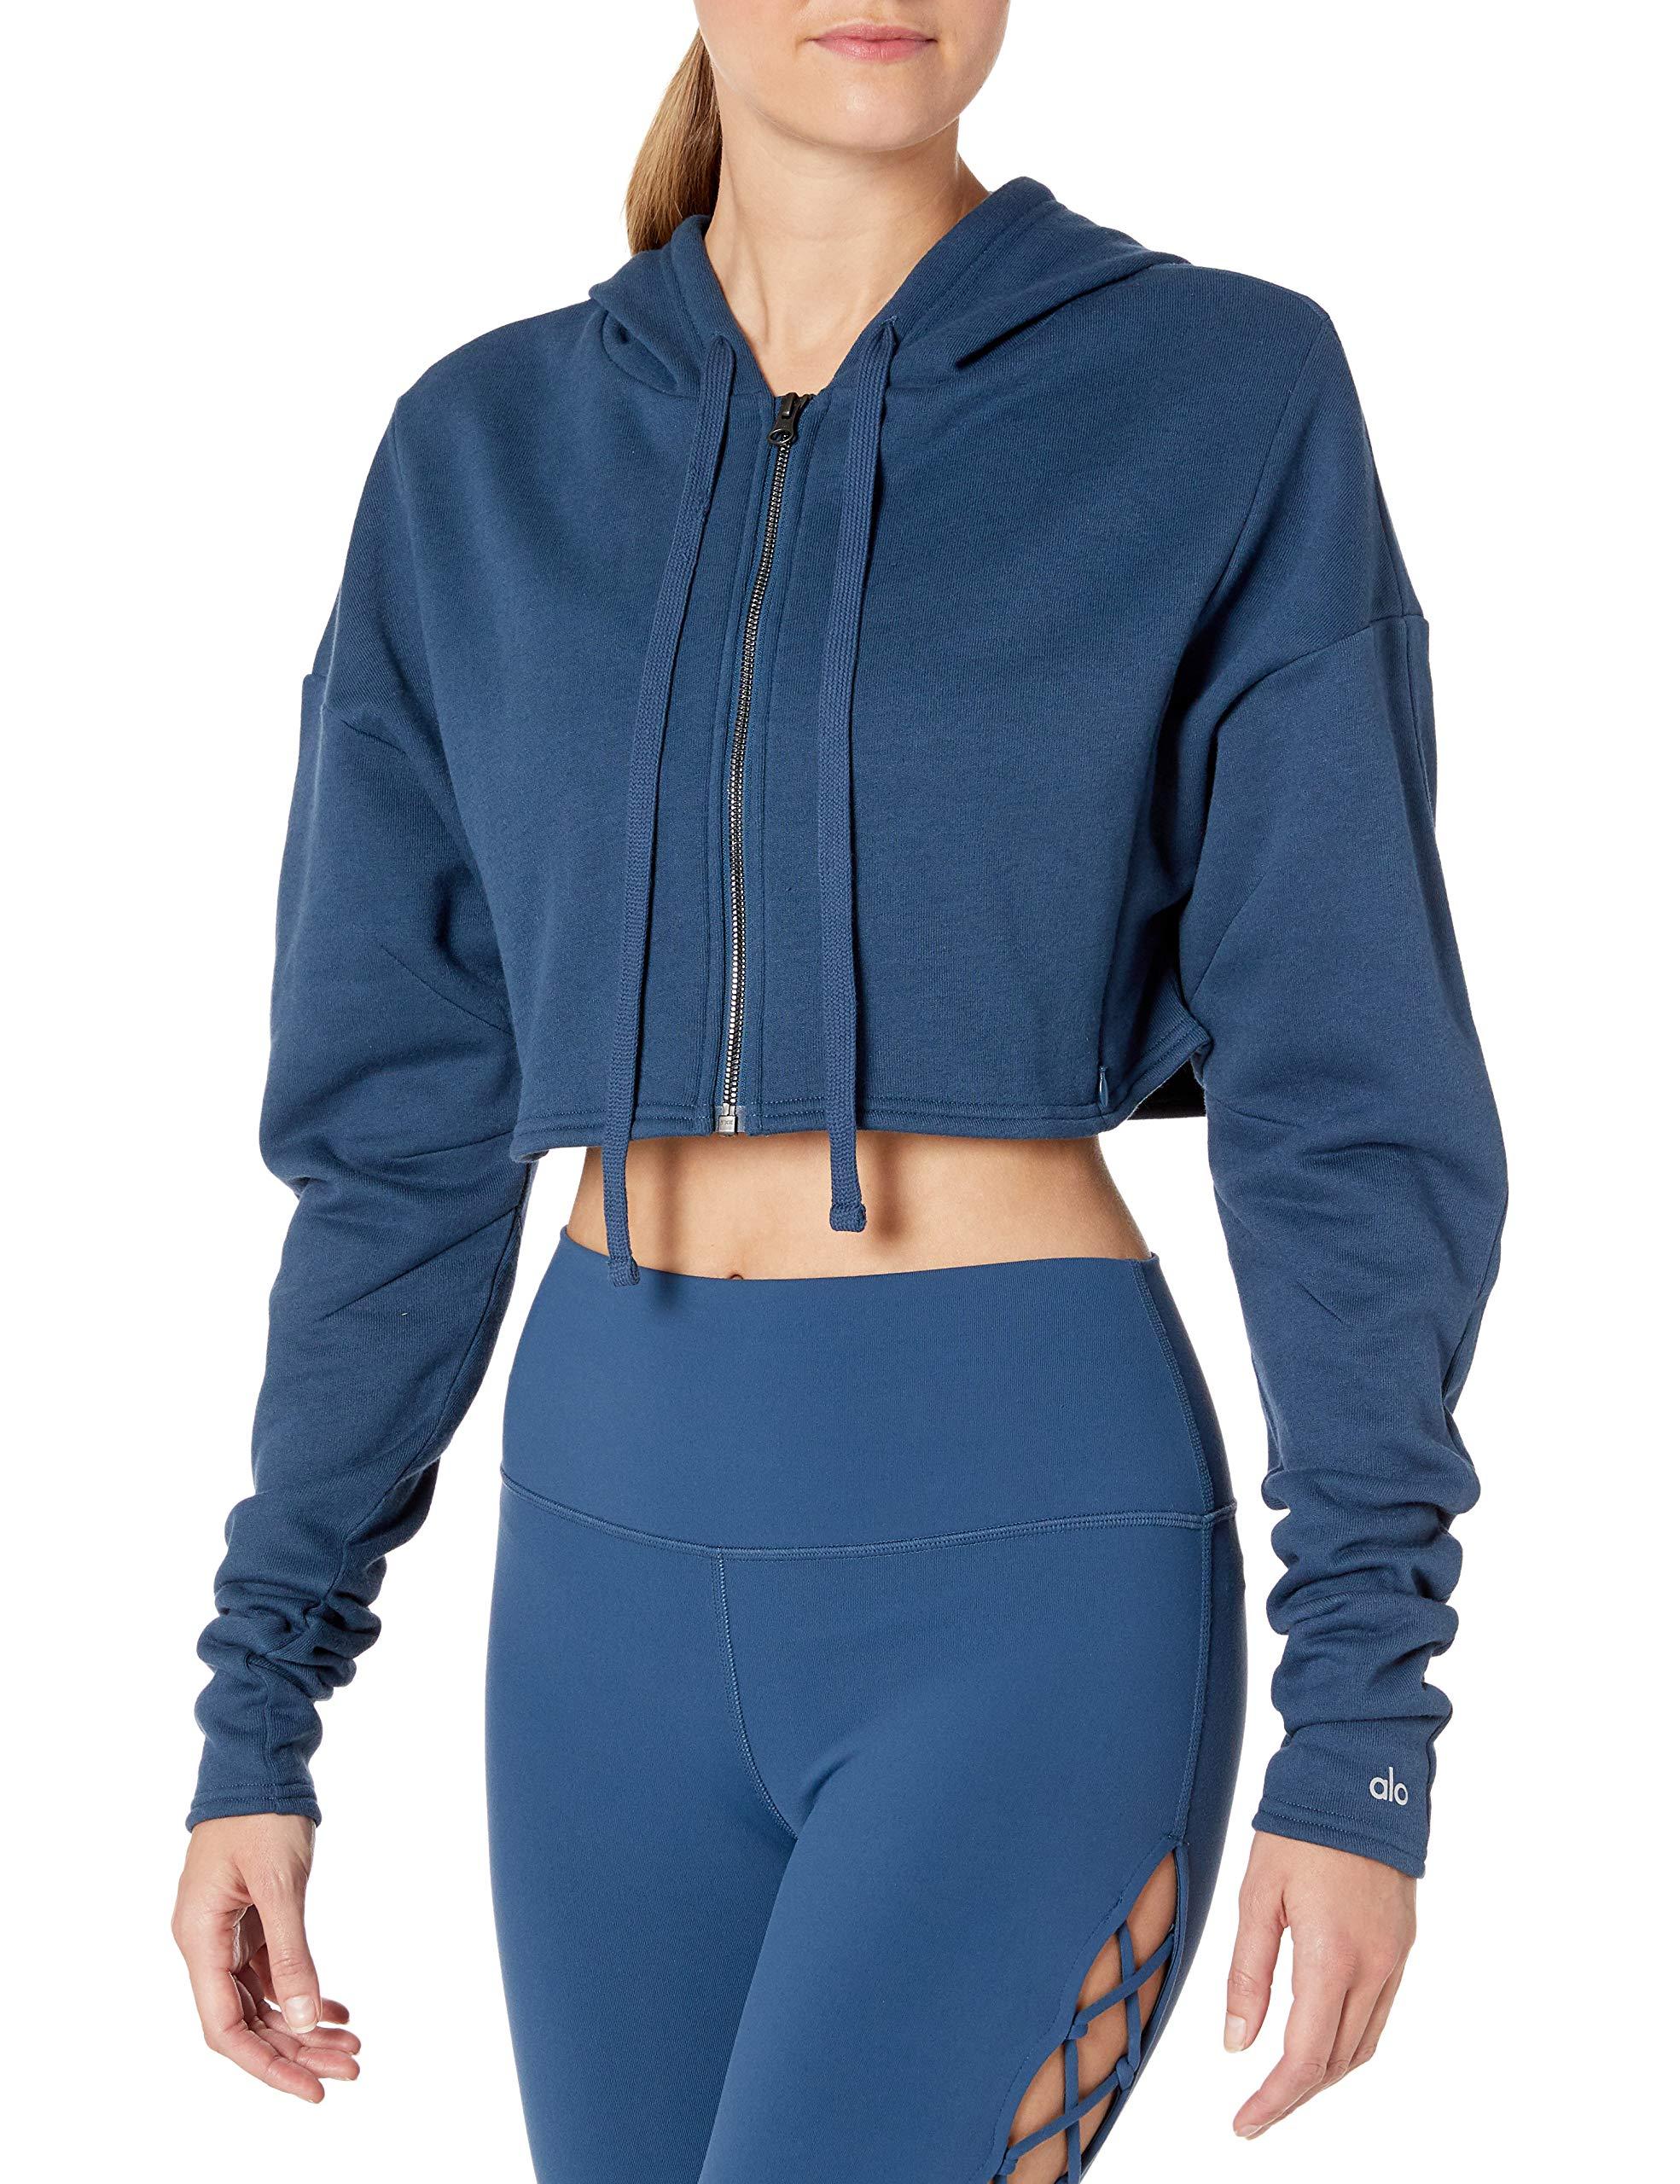 Alo Yoga Fleece Too & From Jacket in Blue - Save 2% - Lyst